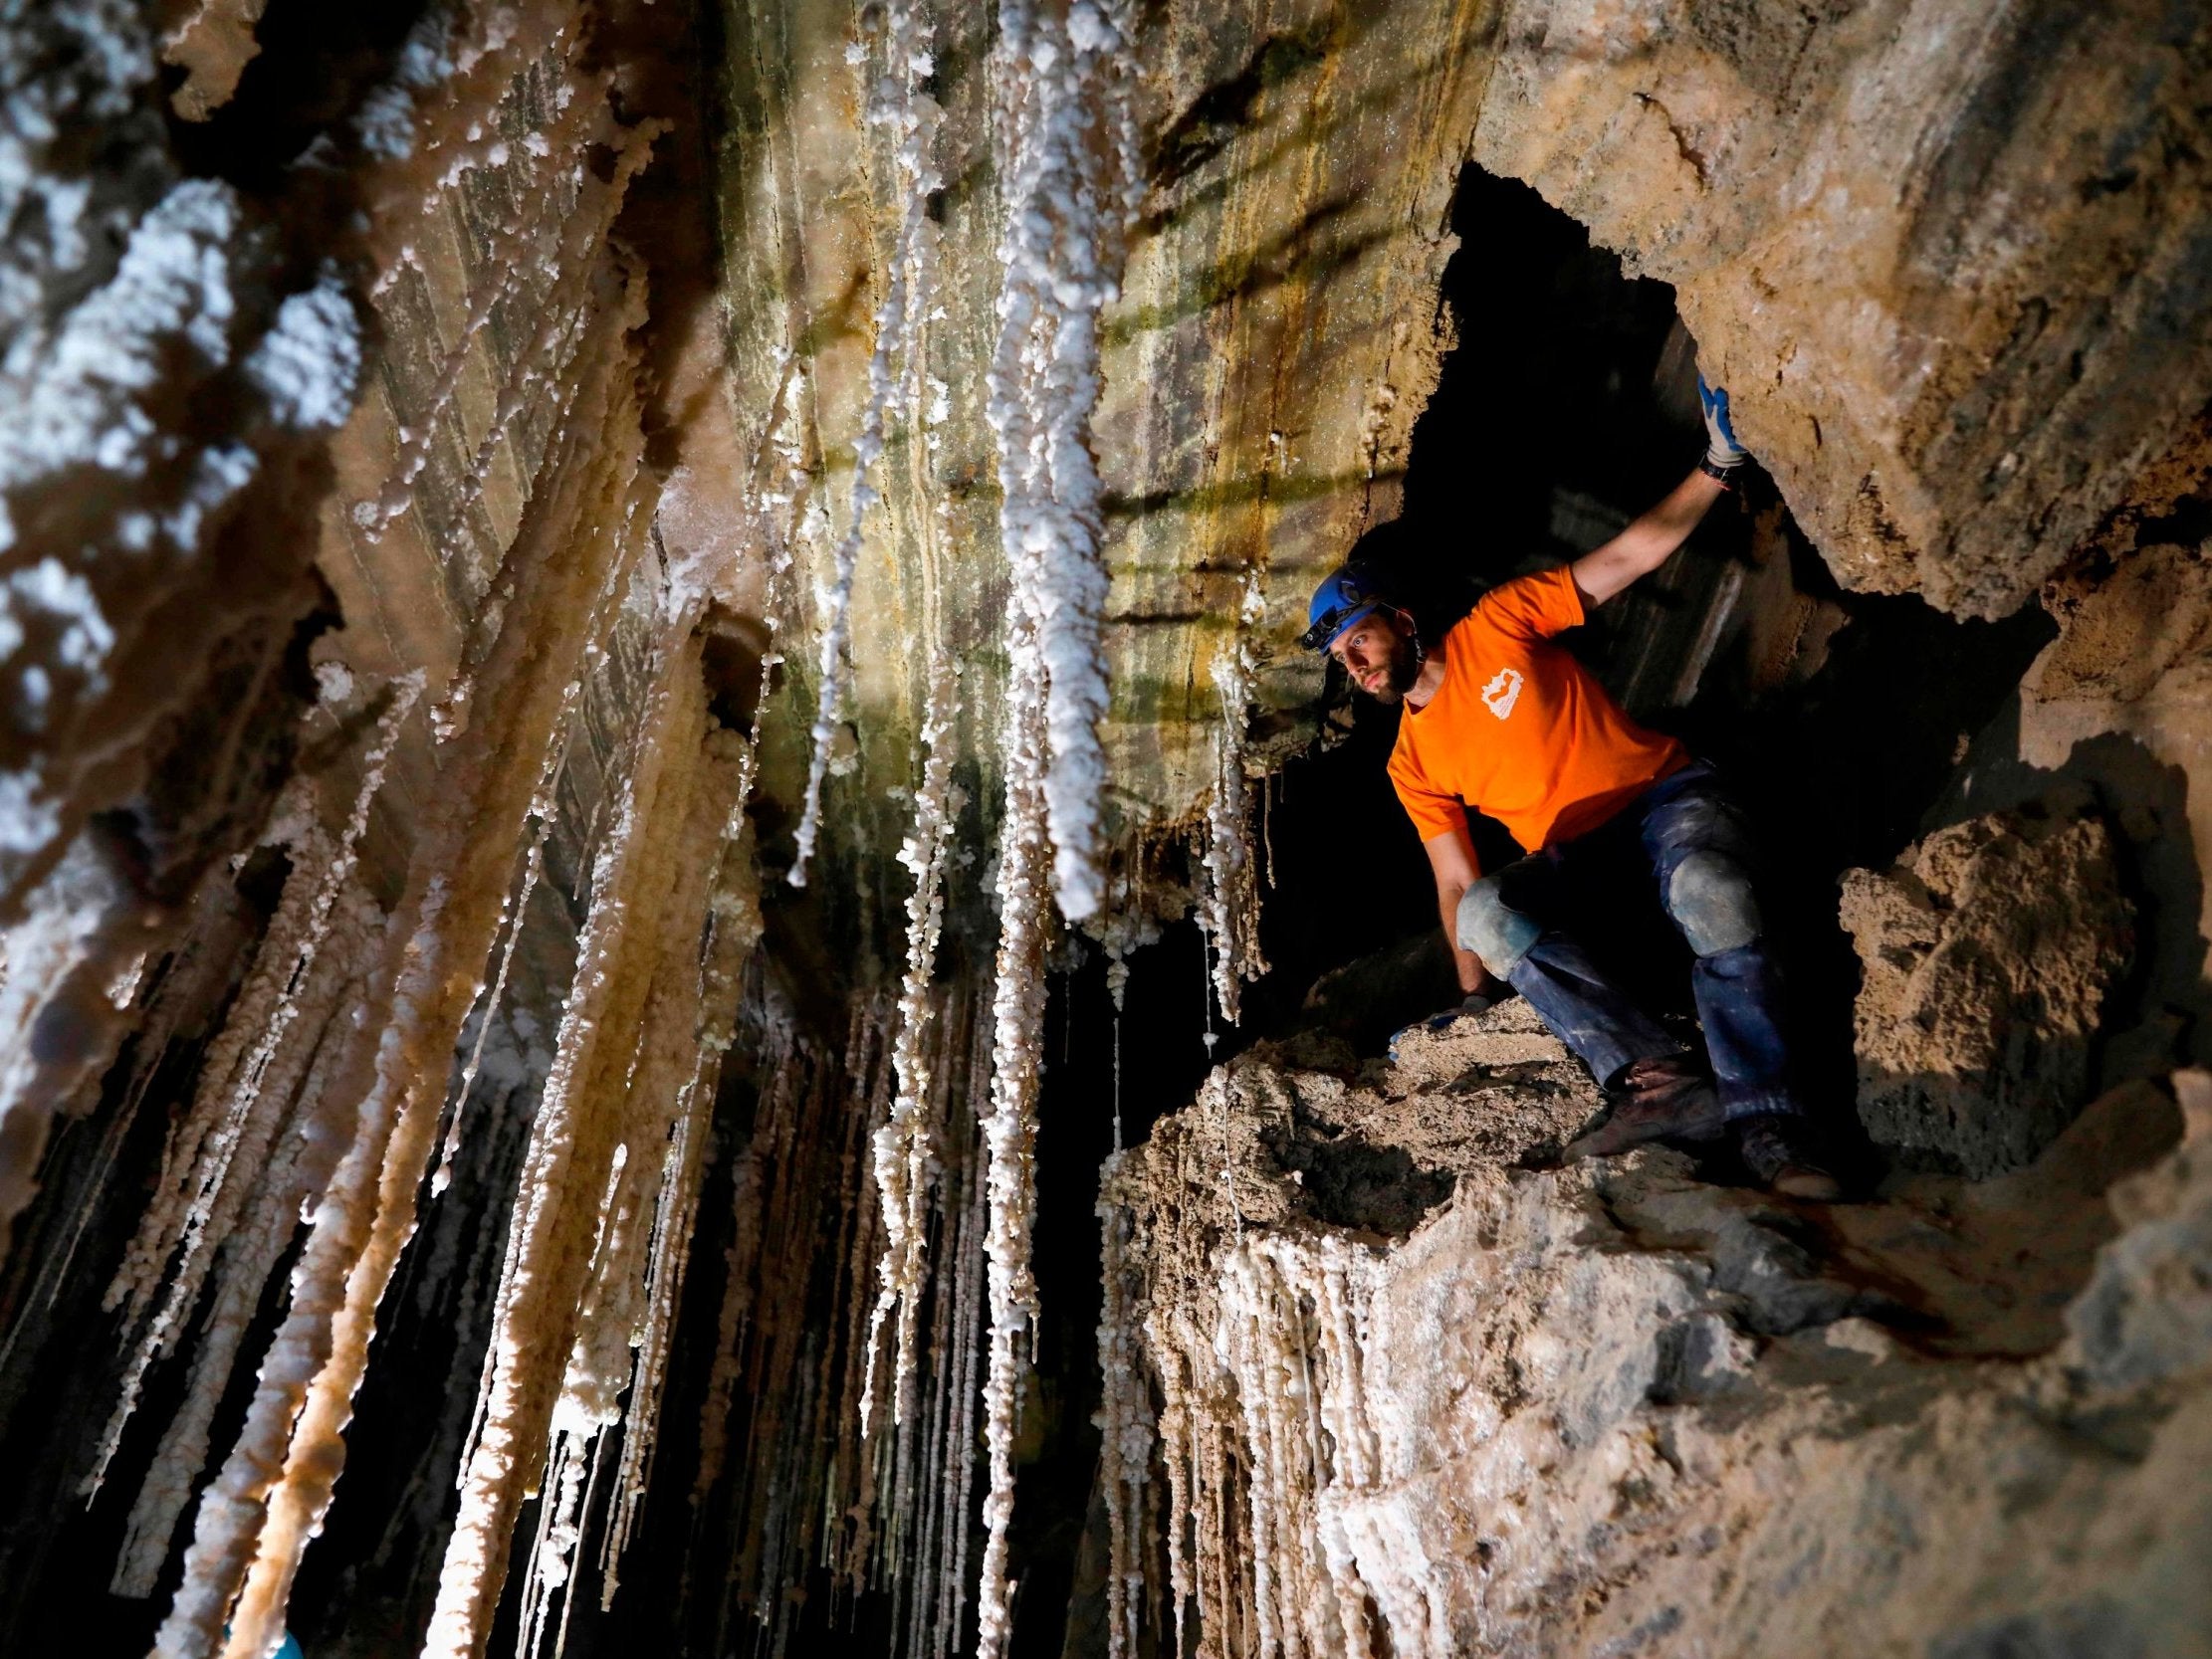 Efraim Cohen of the Israel Cave Explorers Club stands next to salt stalactites in the Malham cave inside Mount Sodom